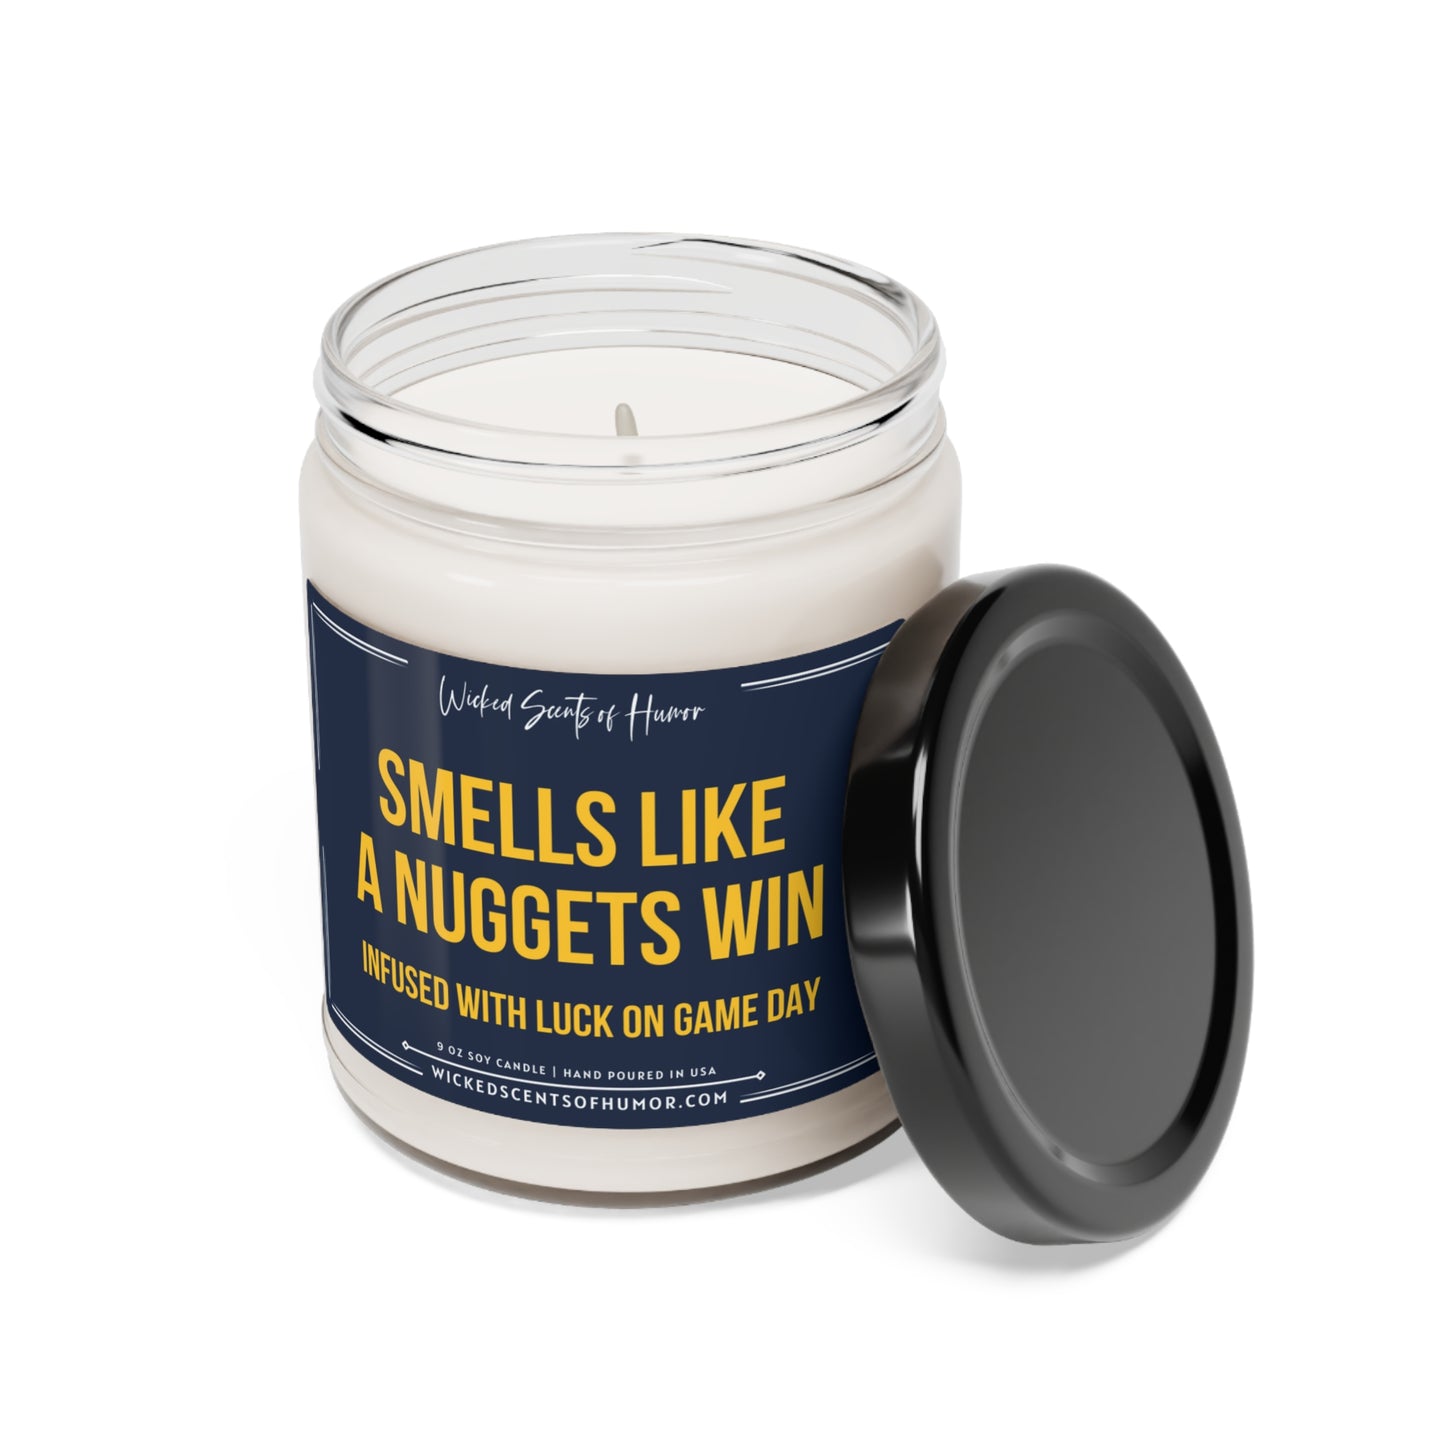 Smells Like Denver Nuggets Candle, Basketball NBA Candle, Nuggets Inspired, Game Day Decor, Unique Gift Idea, Sport Themed Candle